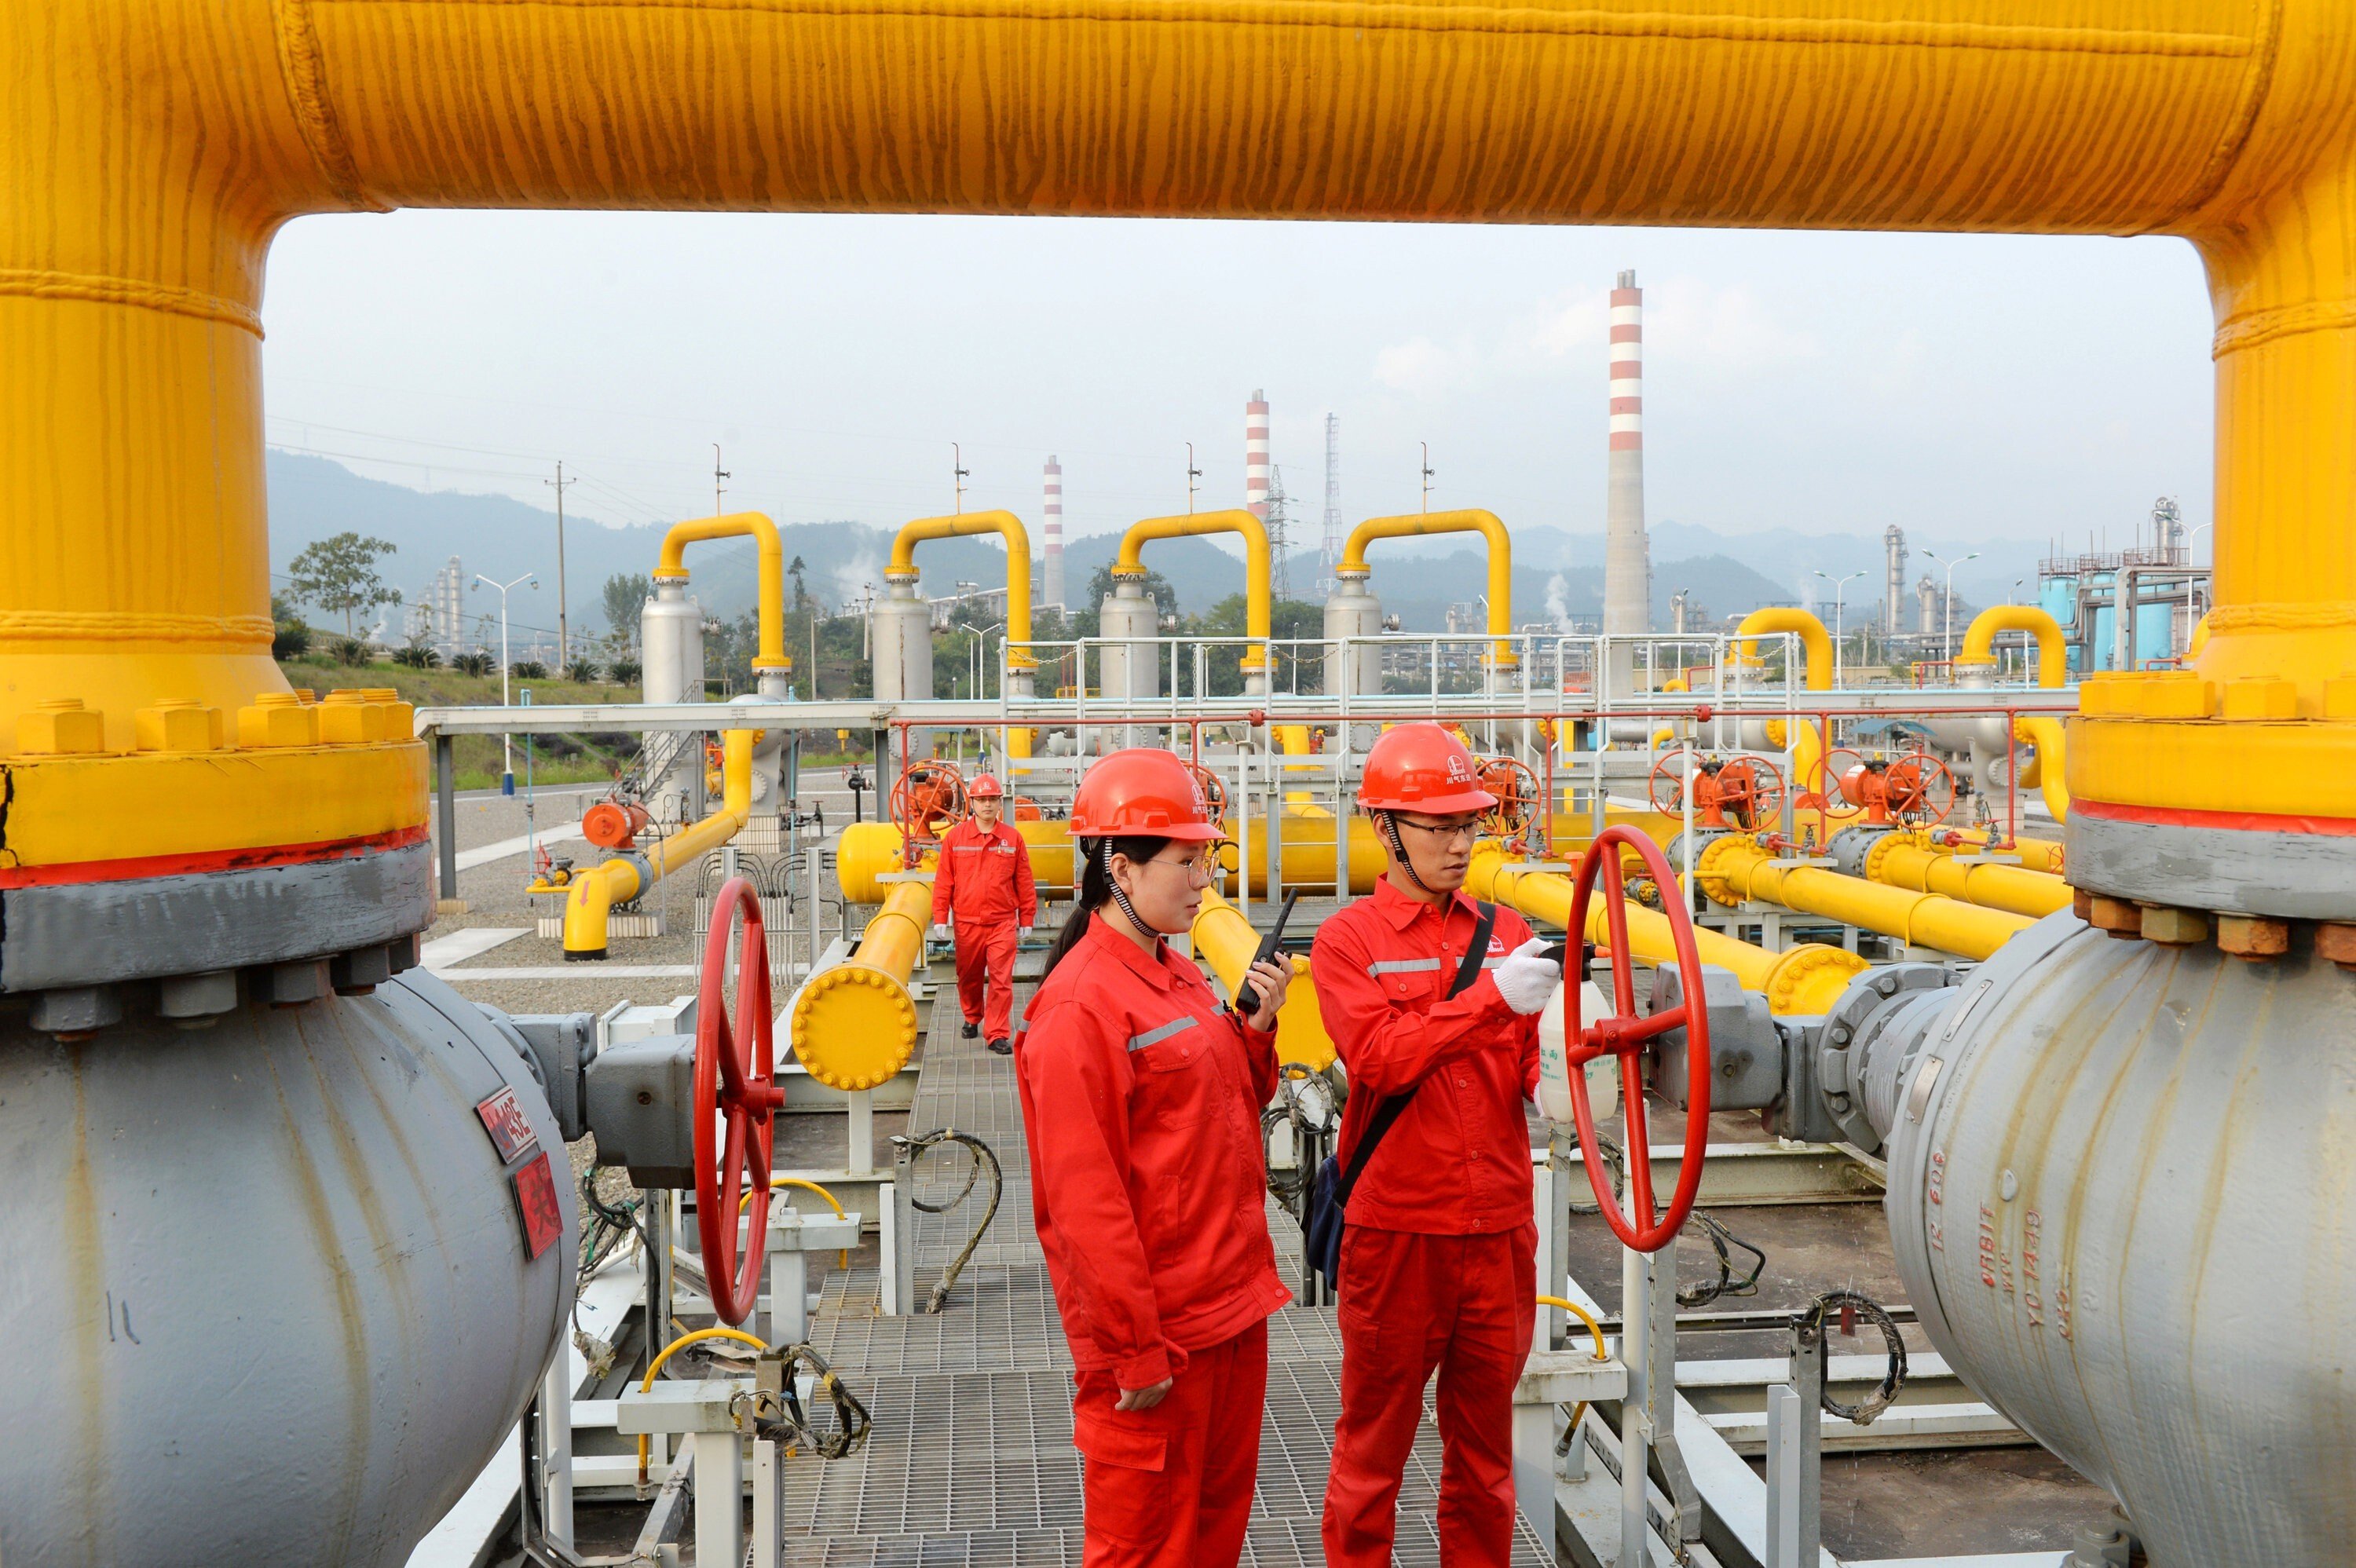 Workers inspect pipelines at a natural gas facility run by Sinopec in Dazhou of Sichuan province on November 1, 2017. Photo: Reuters.